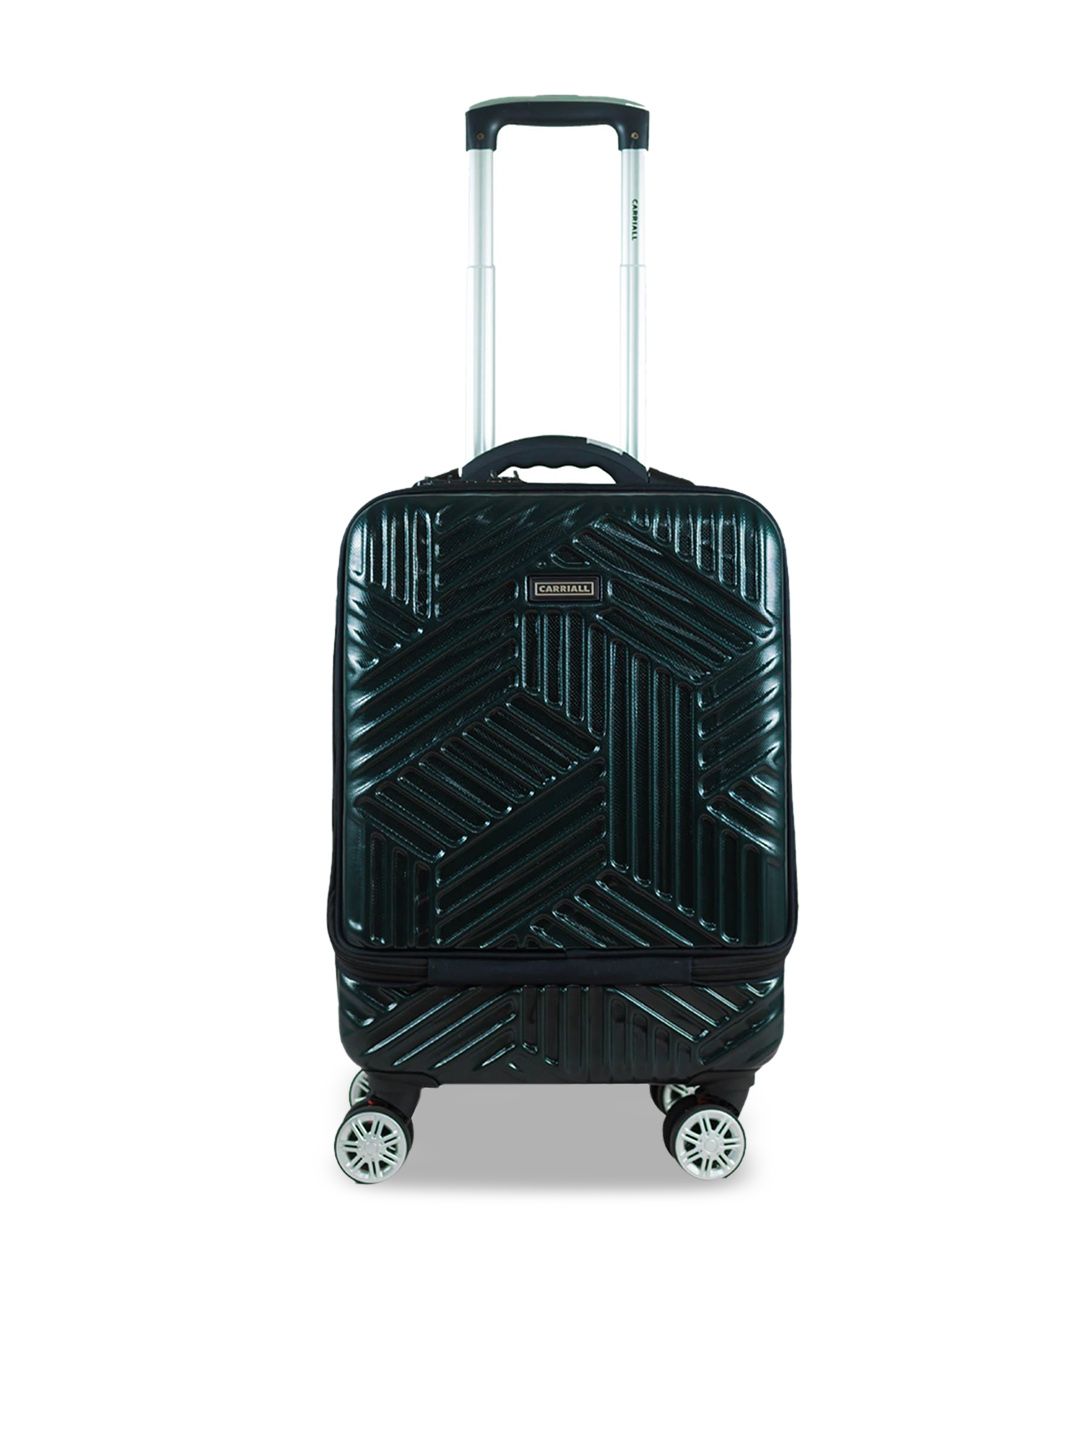 CARRIALL Dark Green Textured Cabin Hard Sided Trolley Bag Price in India